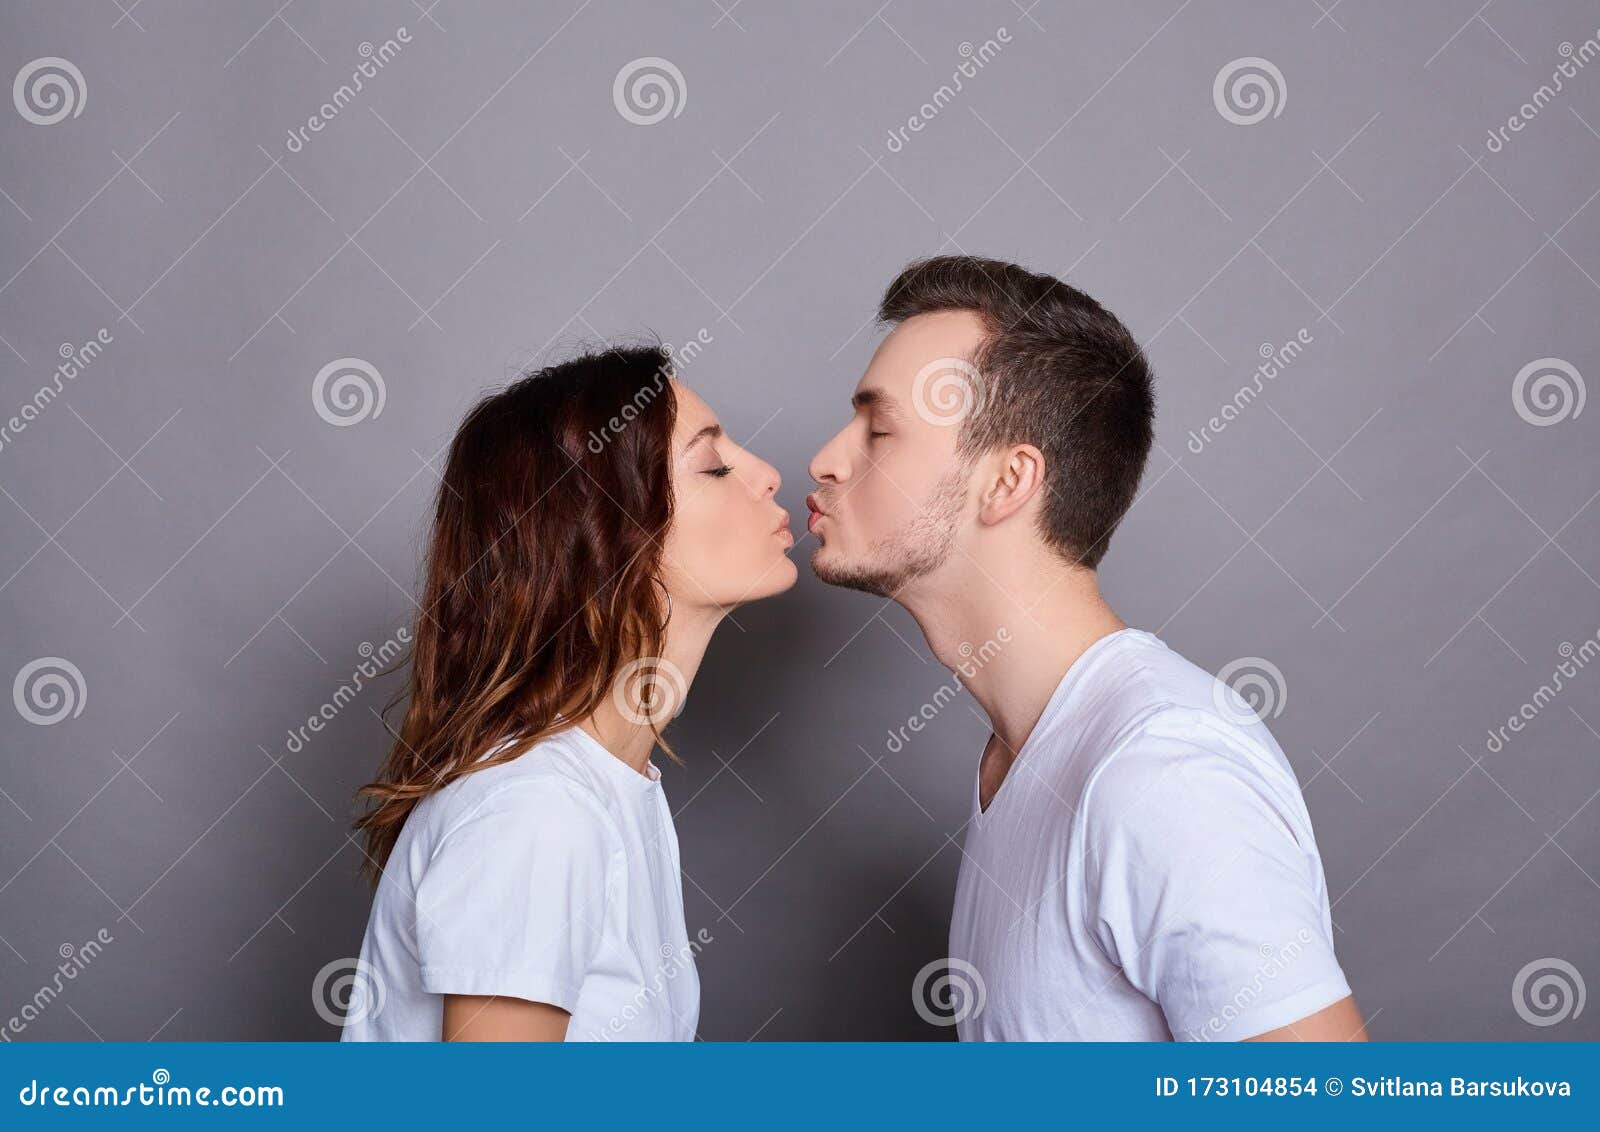 166 Couples Kissing Winter Stock Photos - Free & Royalty-Free Stock Photos  from Dreamstime